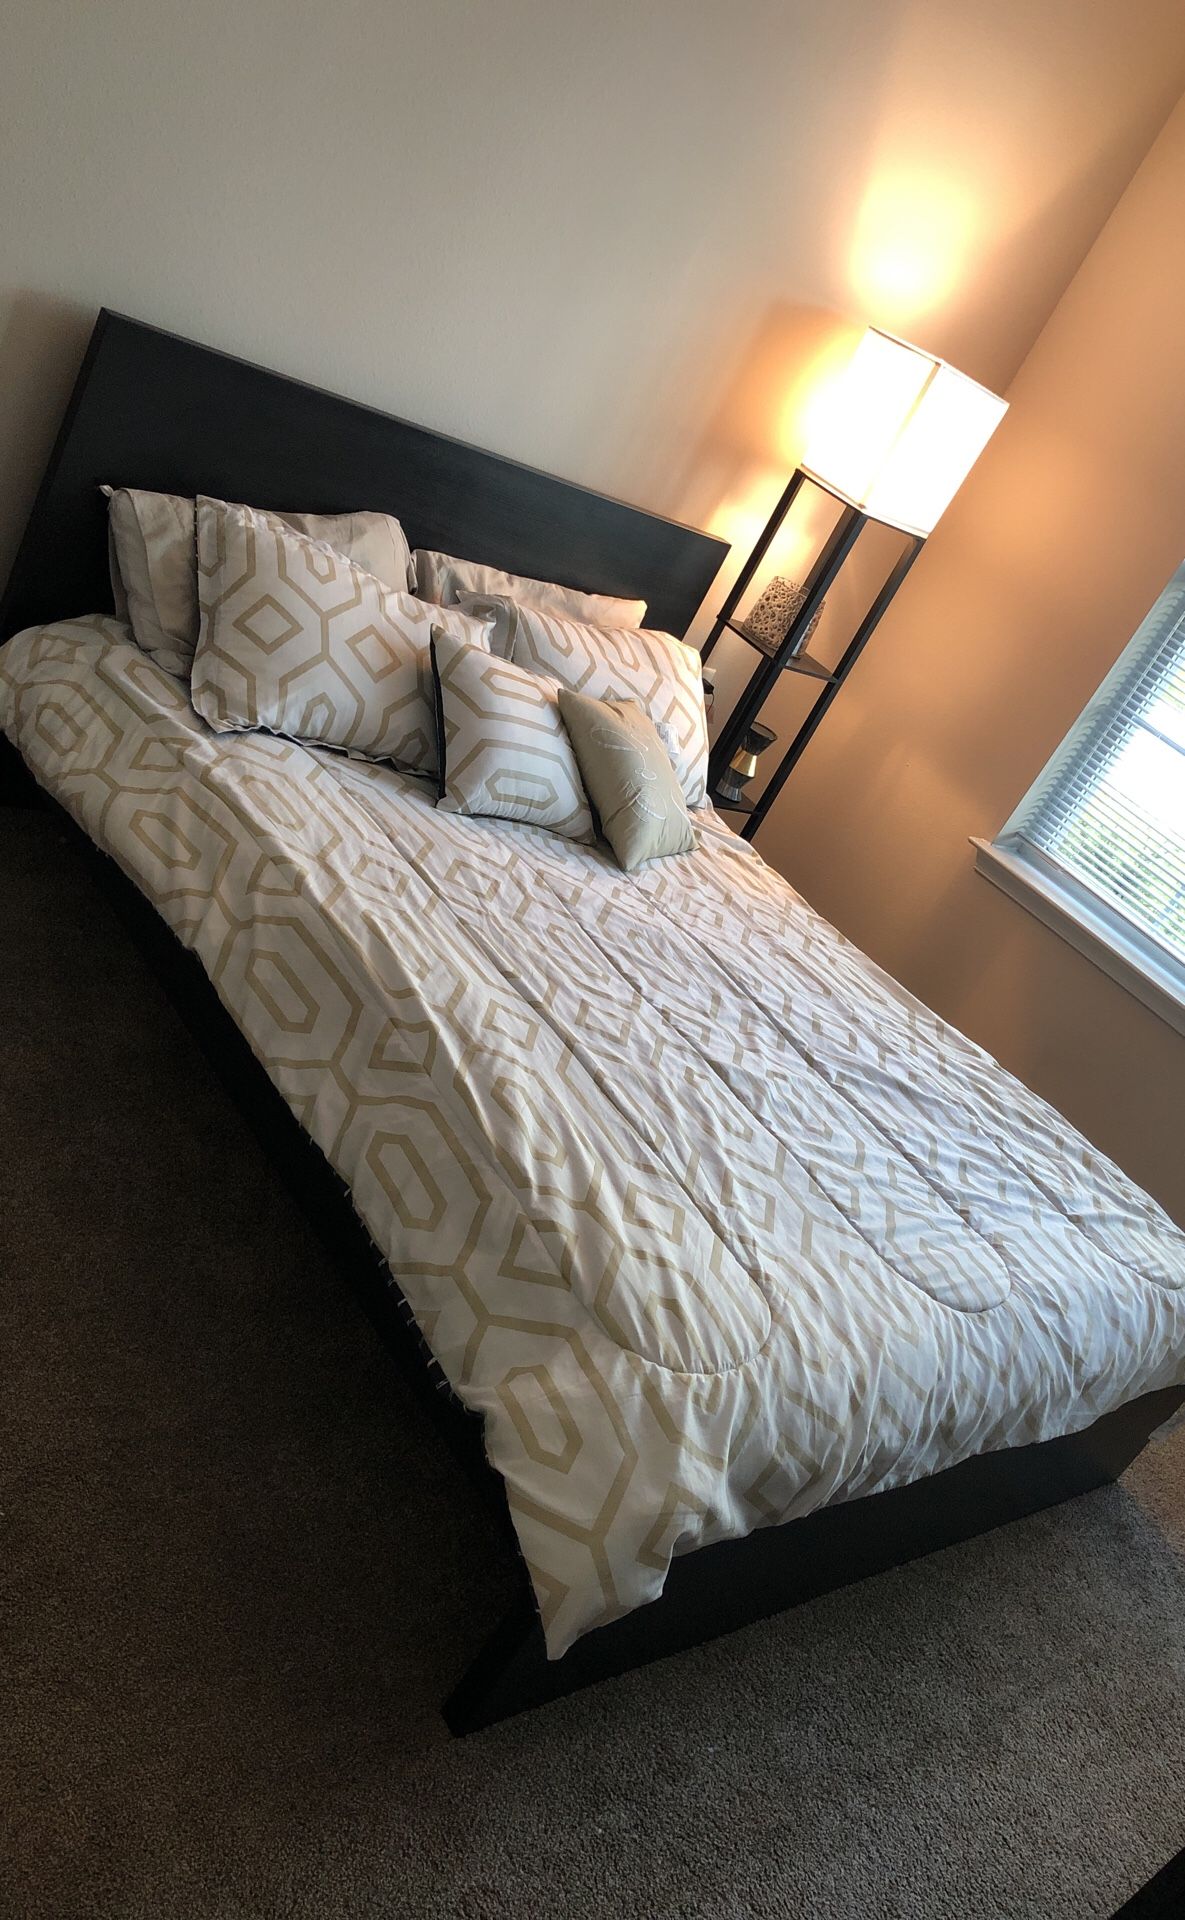 Queen bed & mattress, dresser, night stand, accent pieces. (All included)